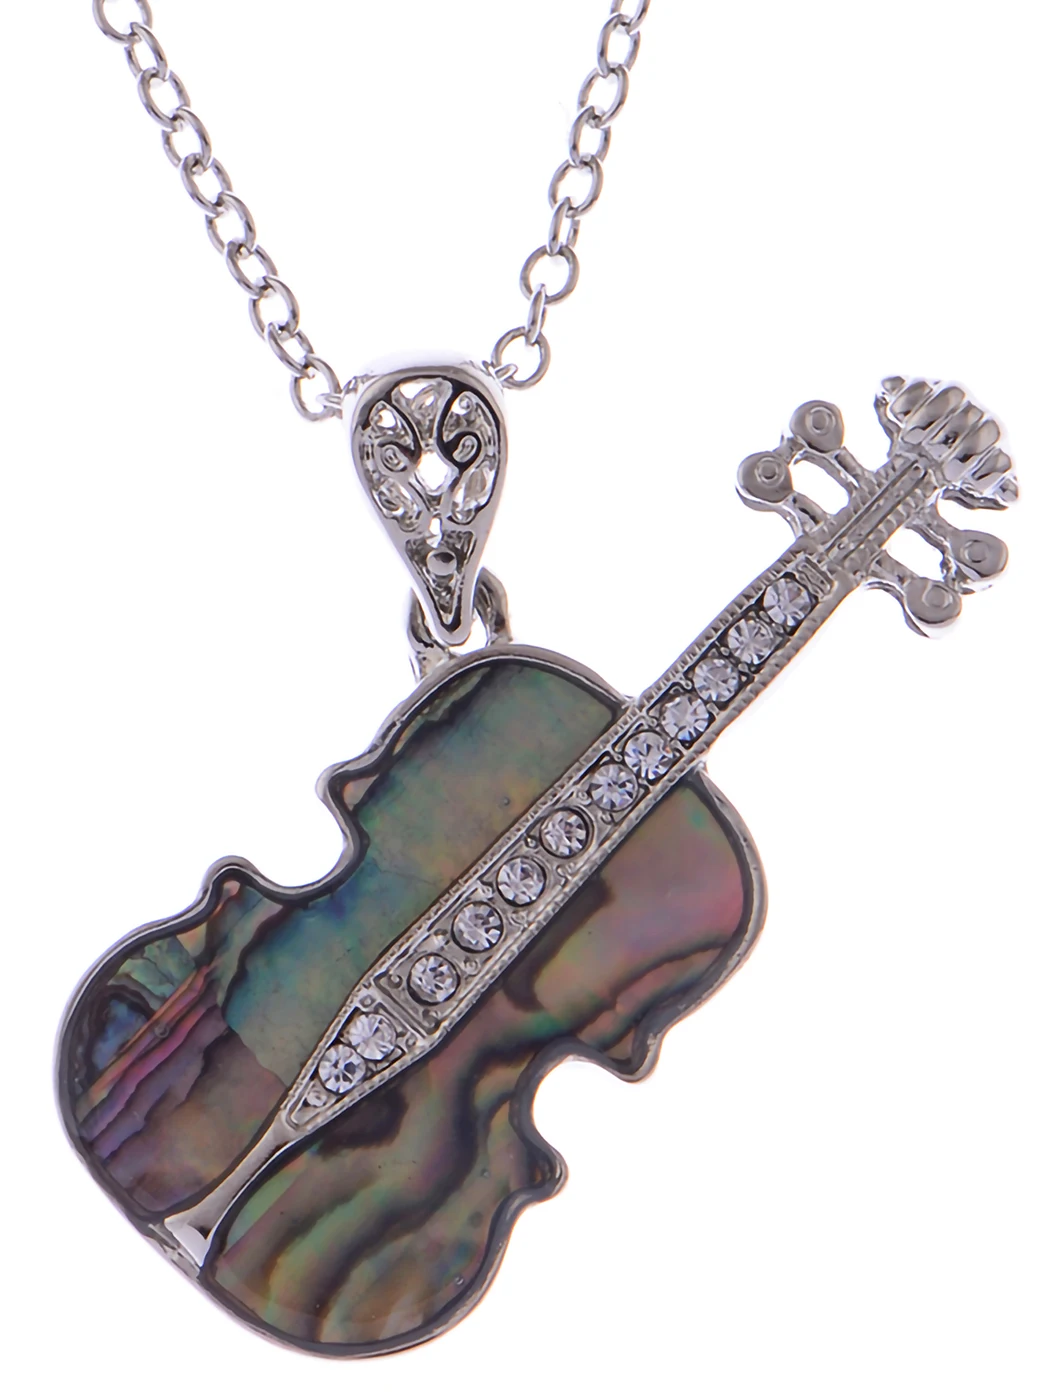 

Womens Silvery Tone Shine Clear Crystal Rhinestones Abalone Colored Enamel Guitar Pendant Necklace